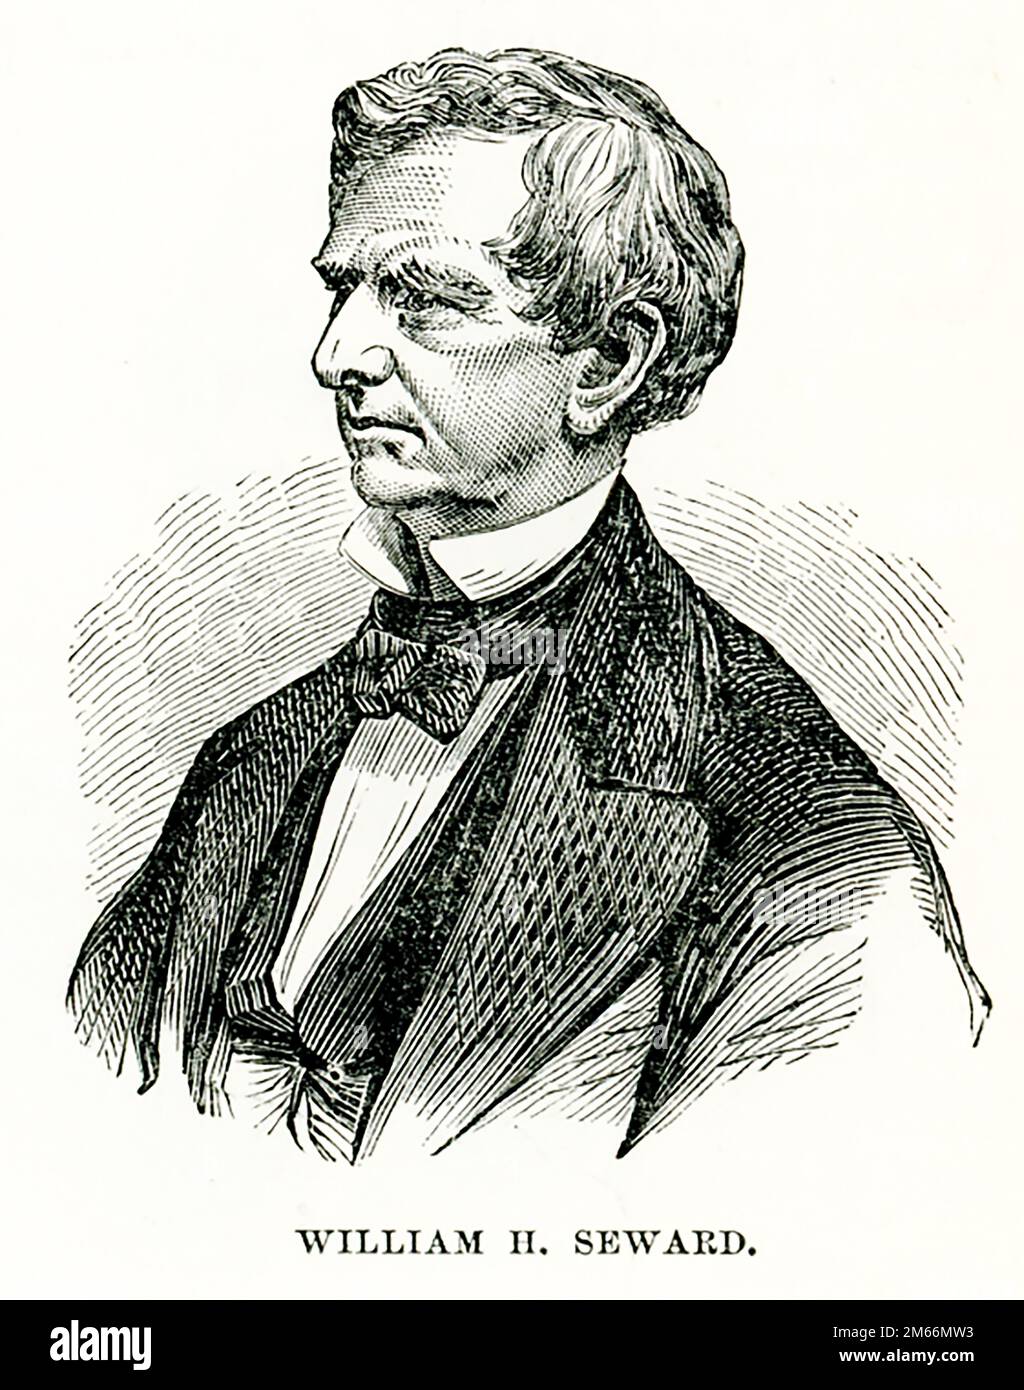 This 1866 illustration shows William Henry Seward. Seward was appointed Secretary of State by Abraham Lincoln on March 5, 1861, and served until March 4, 1869. Seward carefully managed international affairs during the Civil War and also negotiated the 1867 purchase of Alaska. Stock Photo